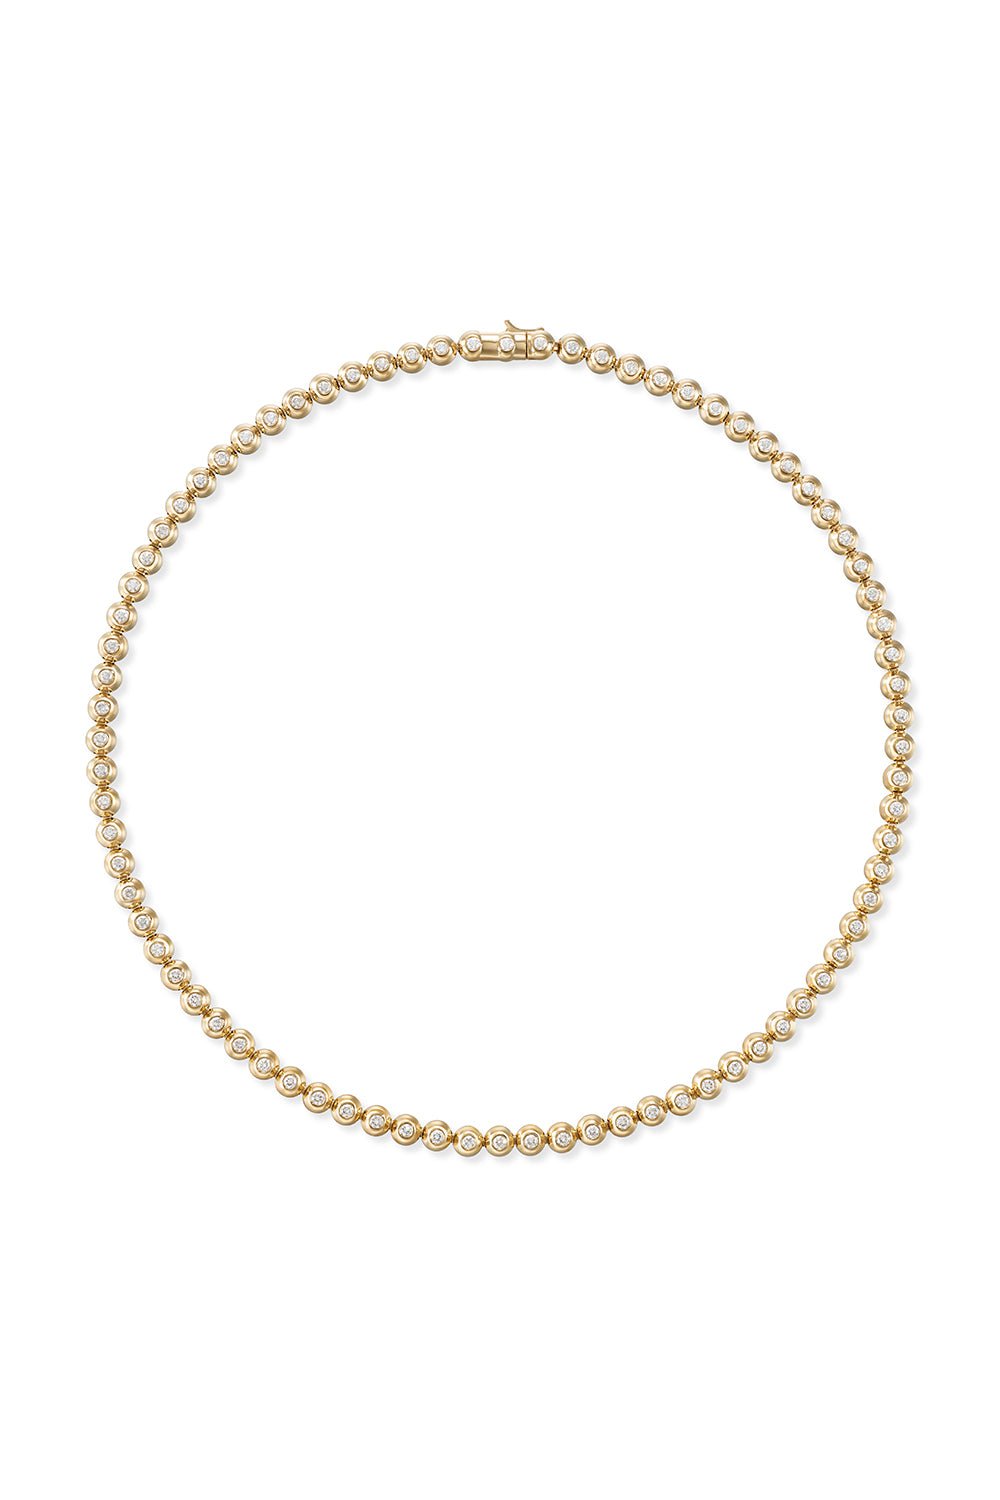 MELISSA KAYE-Small Audrey Tennis Necklace-YELLOW GOLD